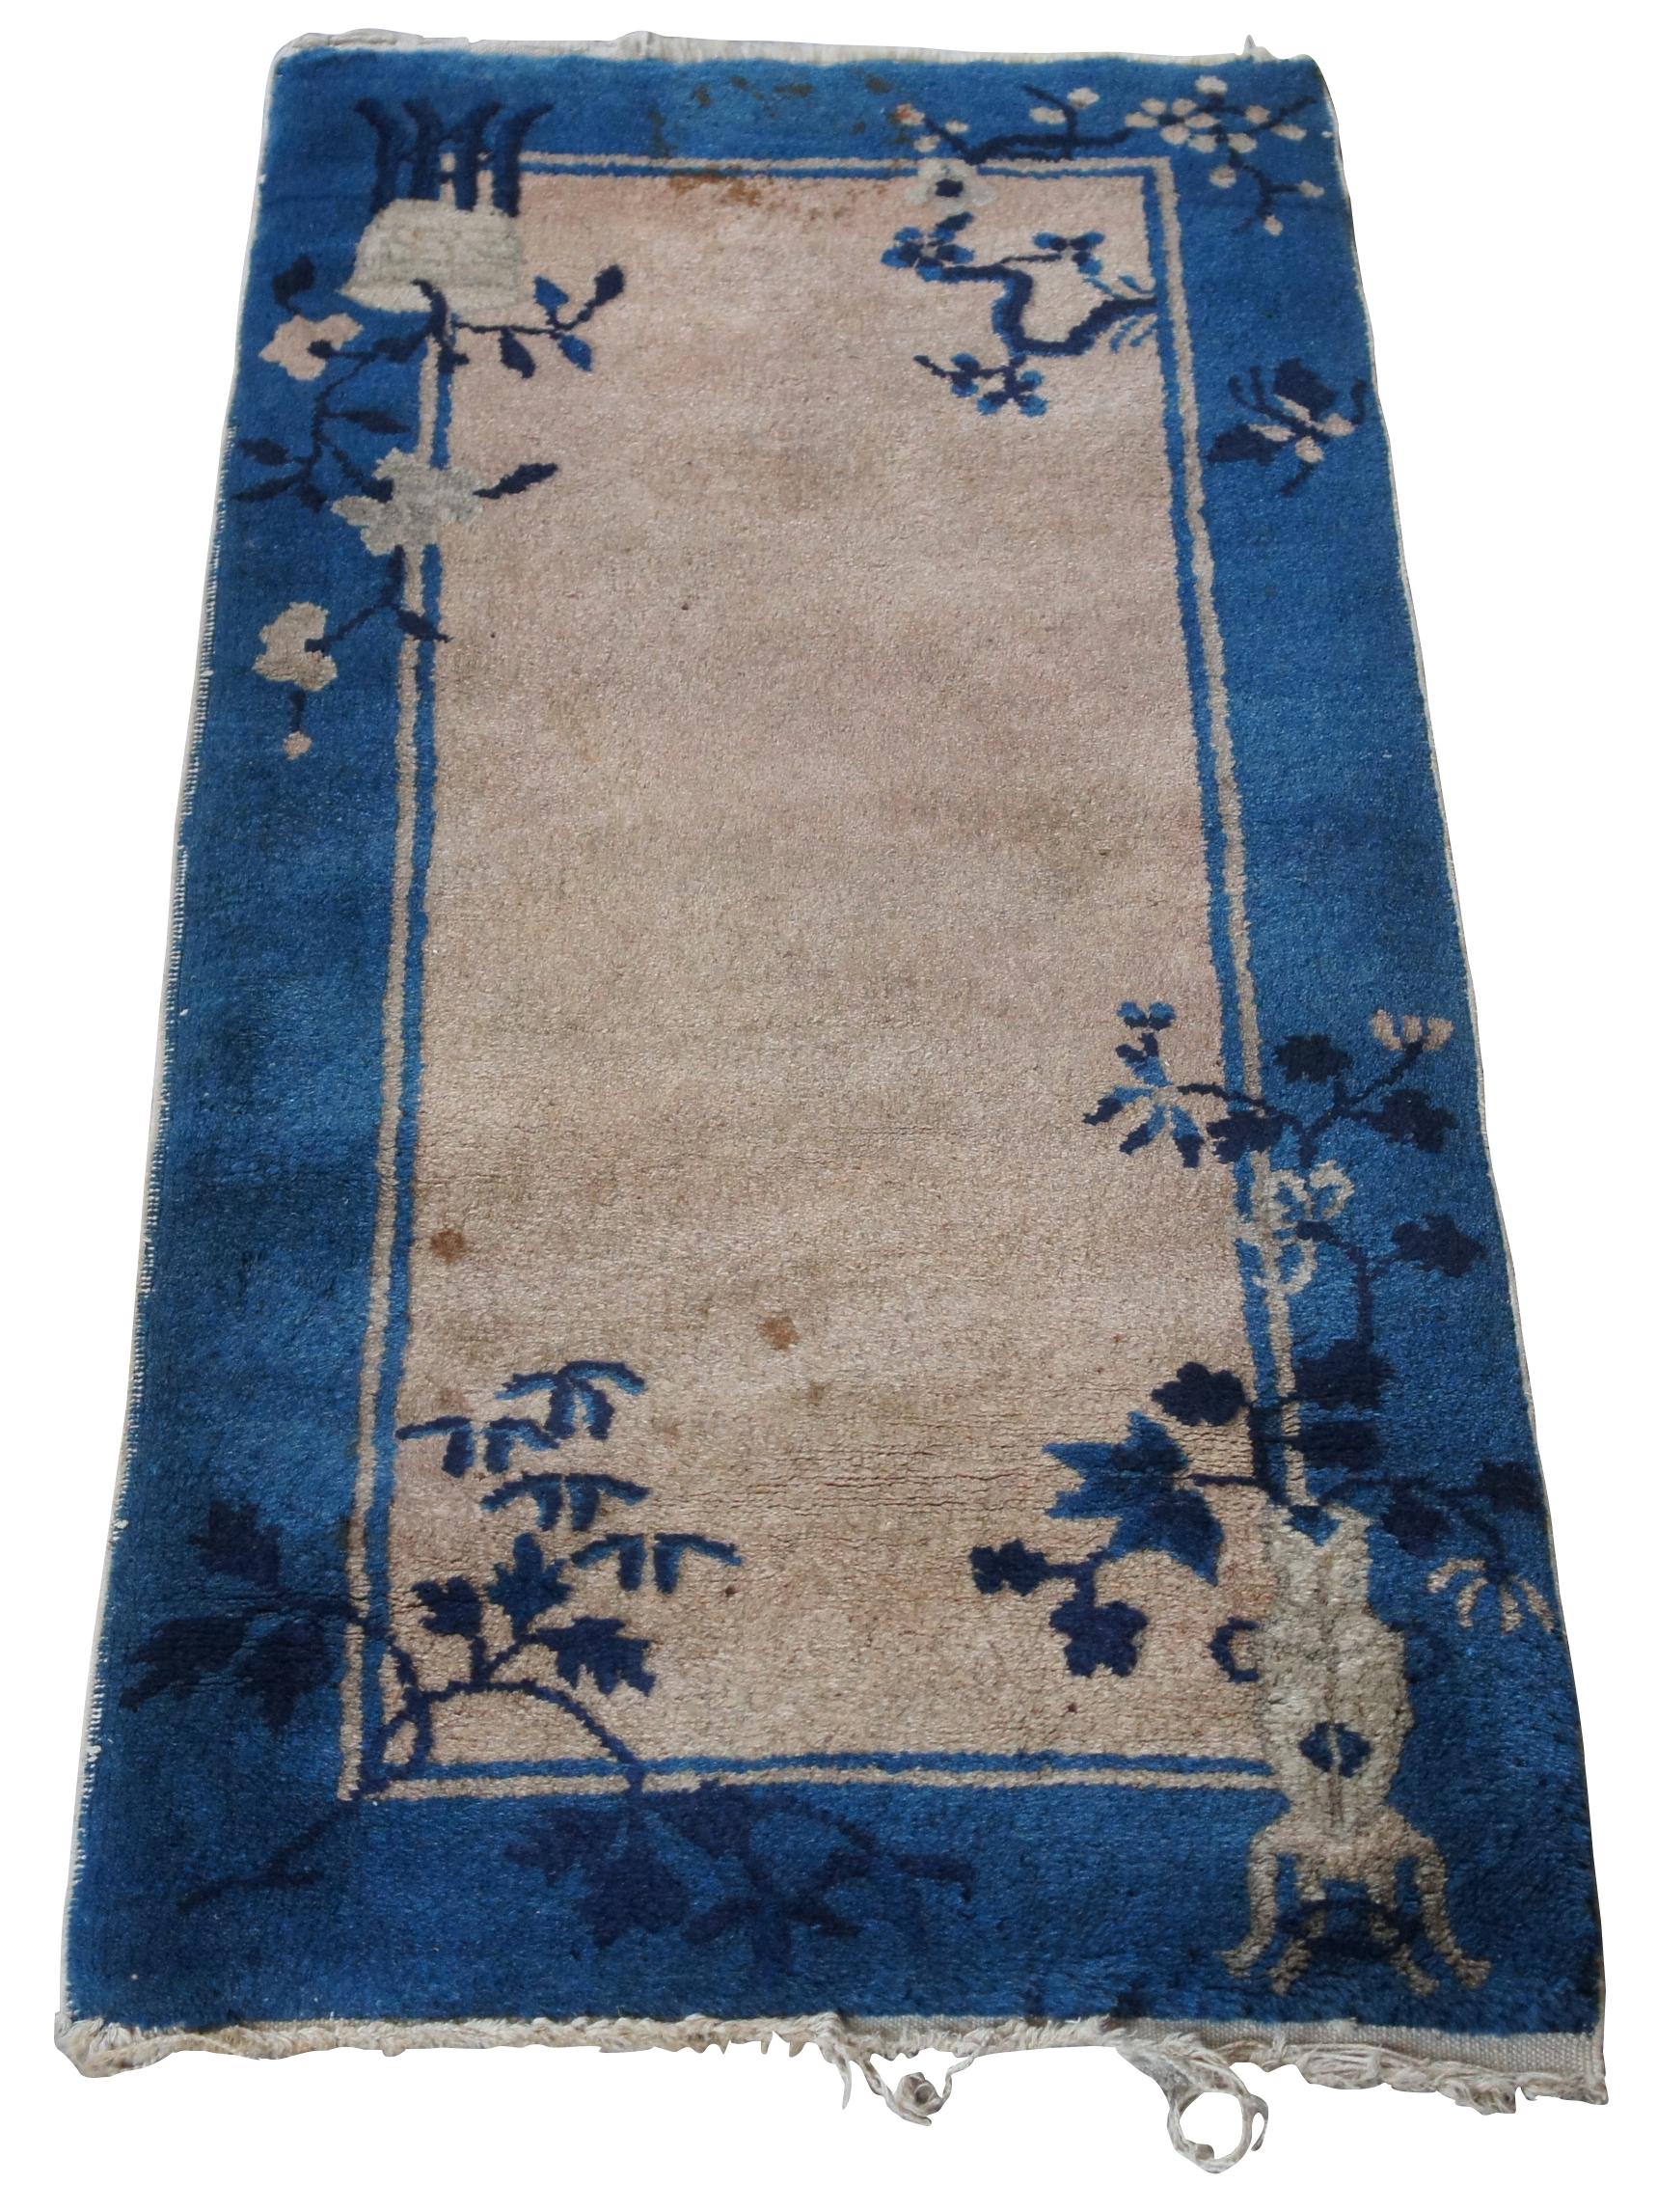 Chinoiserie Antique Art Deco Chinese Floral Blue Pink Area Rug Mat Oriental Runner Wool